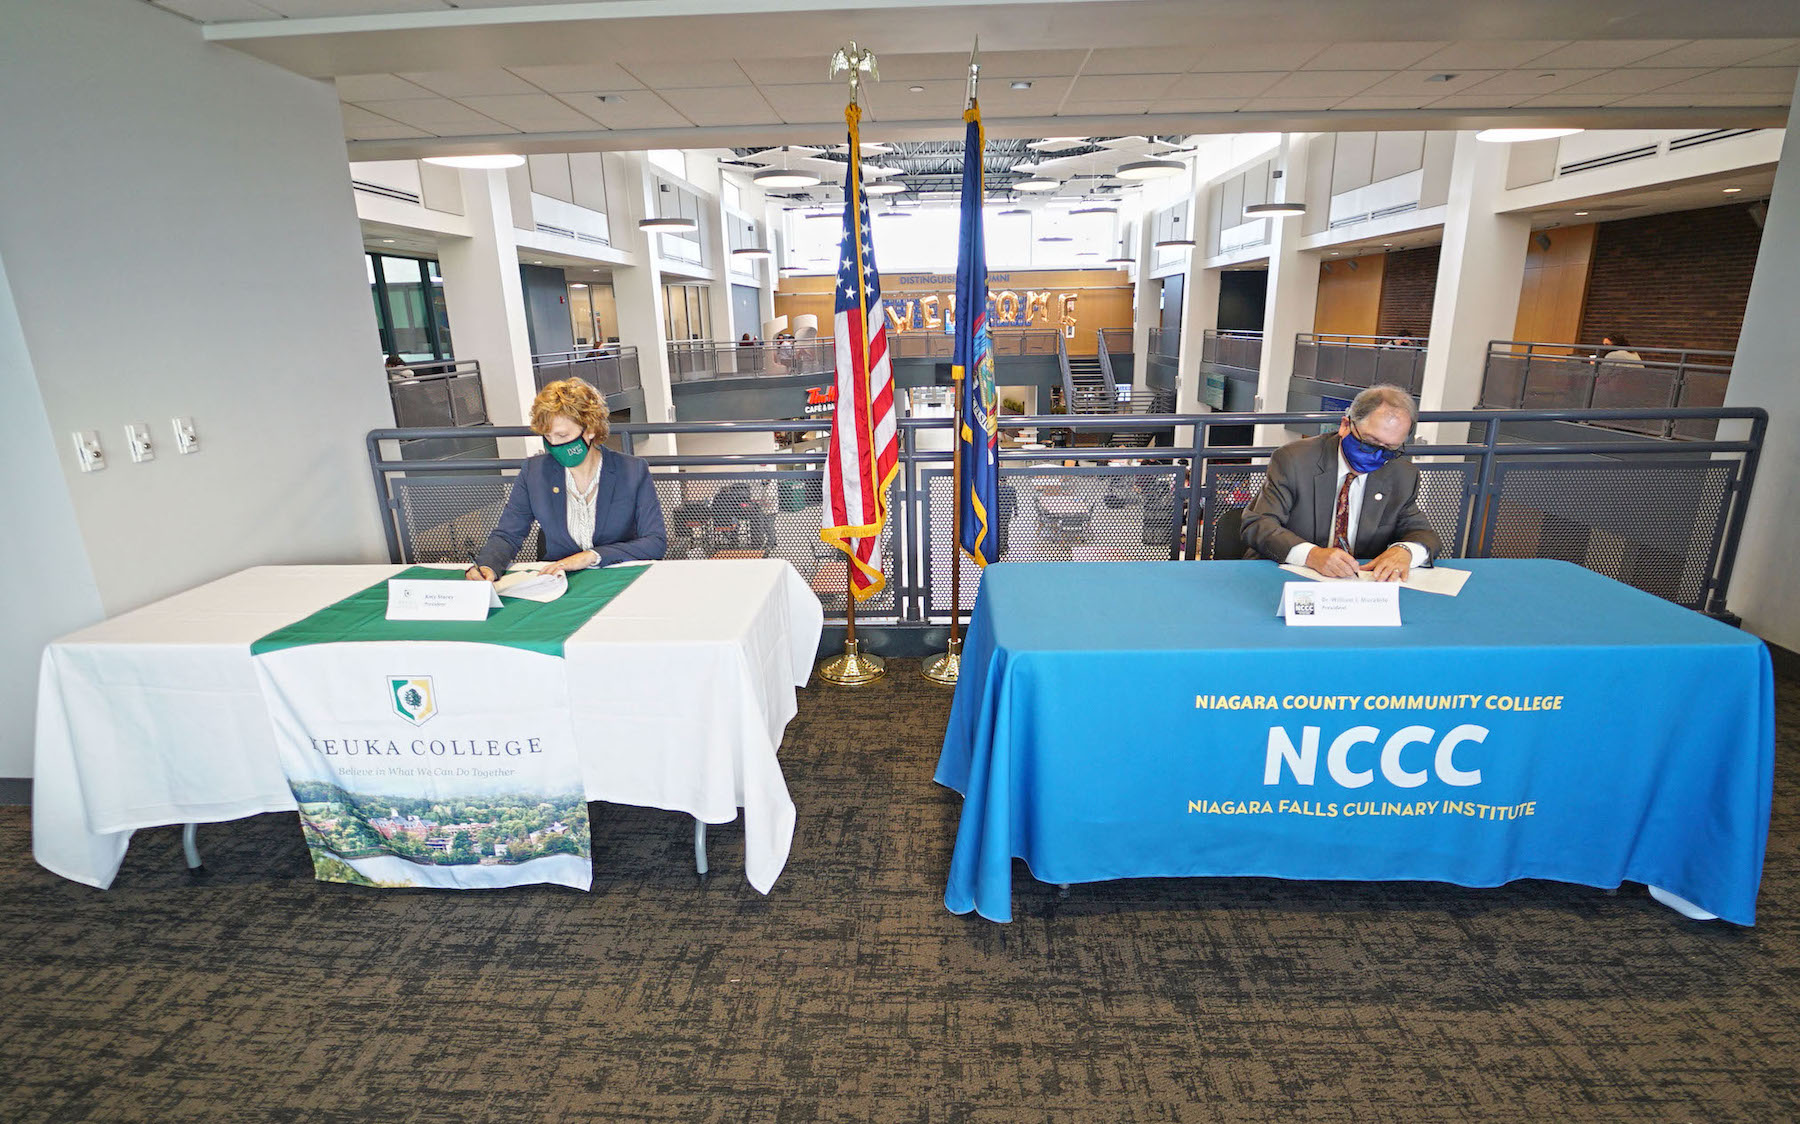 Keuka College President Amy Storey and NCCC President William J. Murabito, Ph.D. sign articulation agreements between the colleges. (Submitted photos)